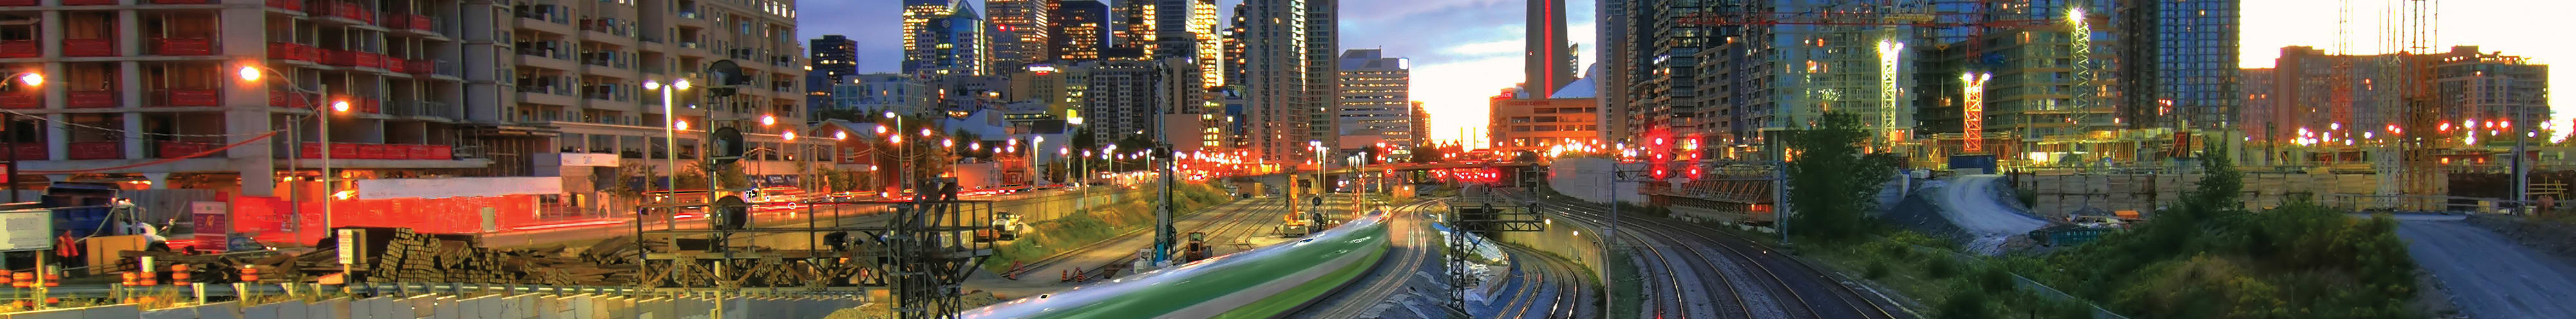 GO Train at dusk in downtown Toronto with CN Tower in the background